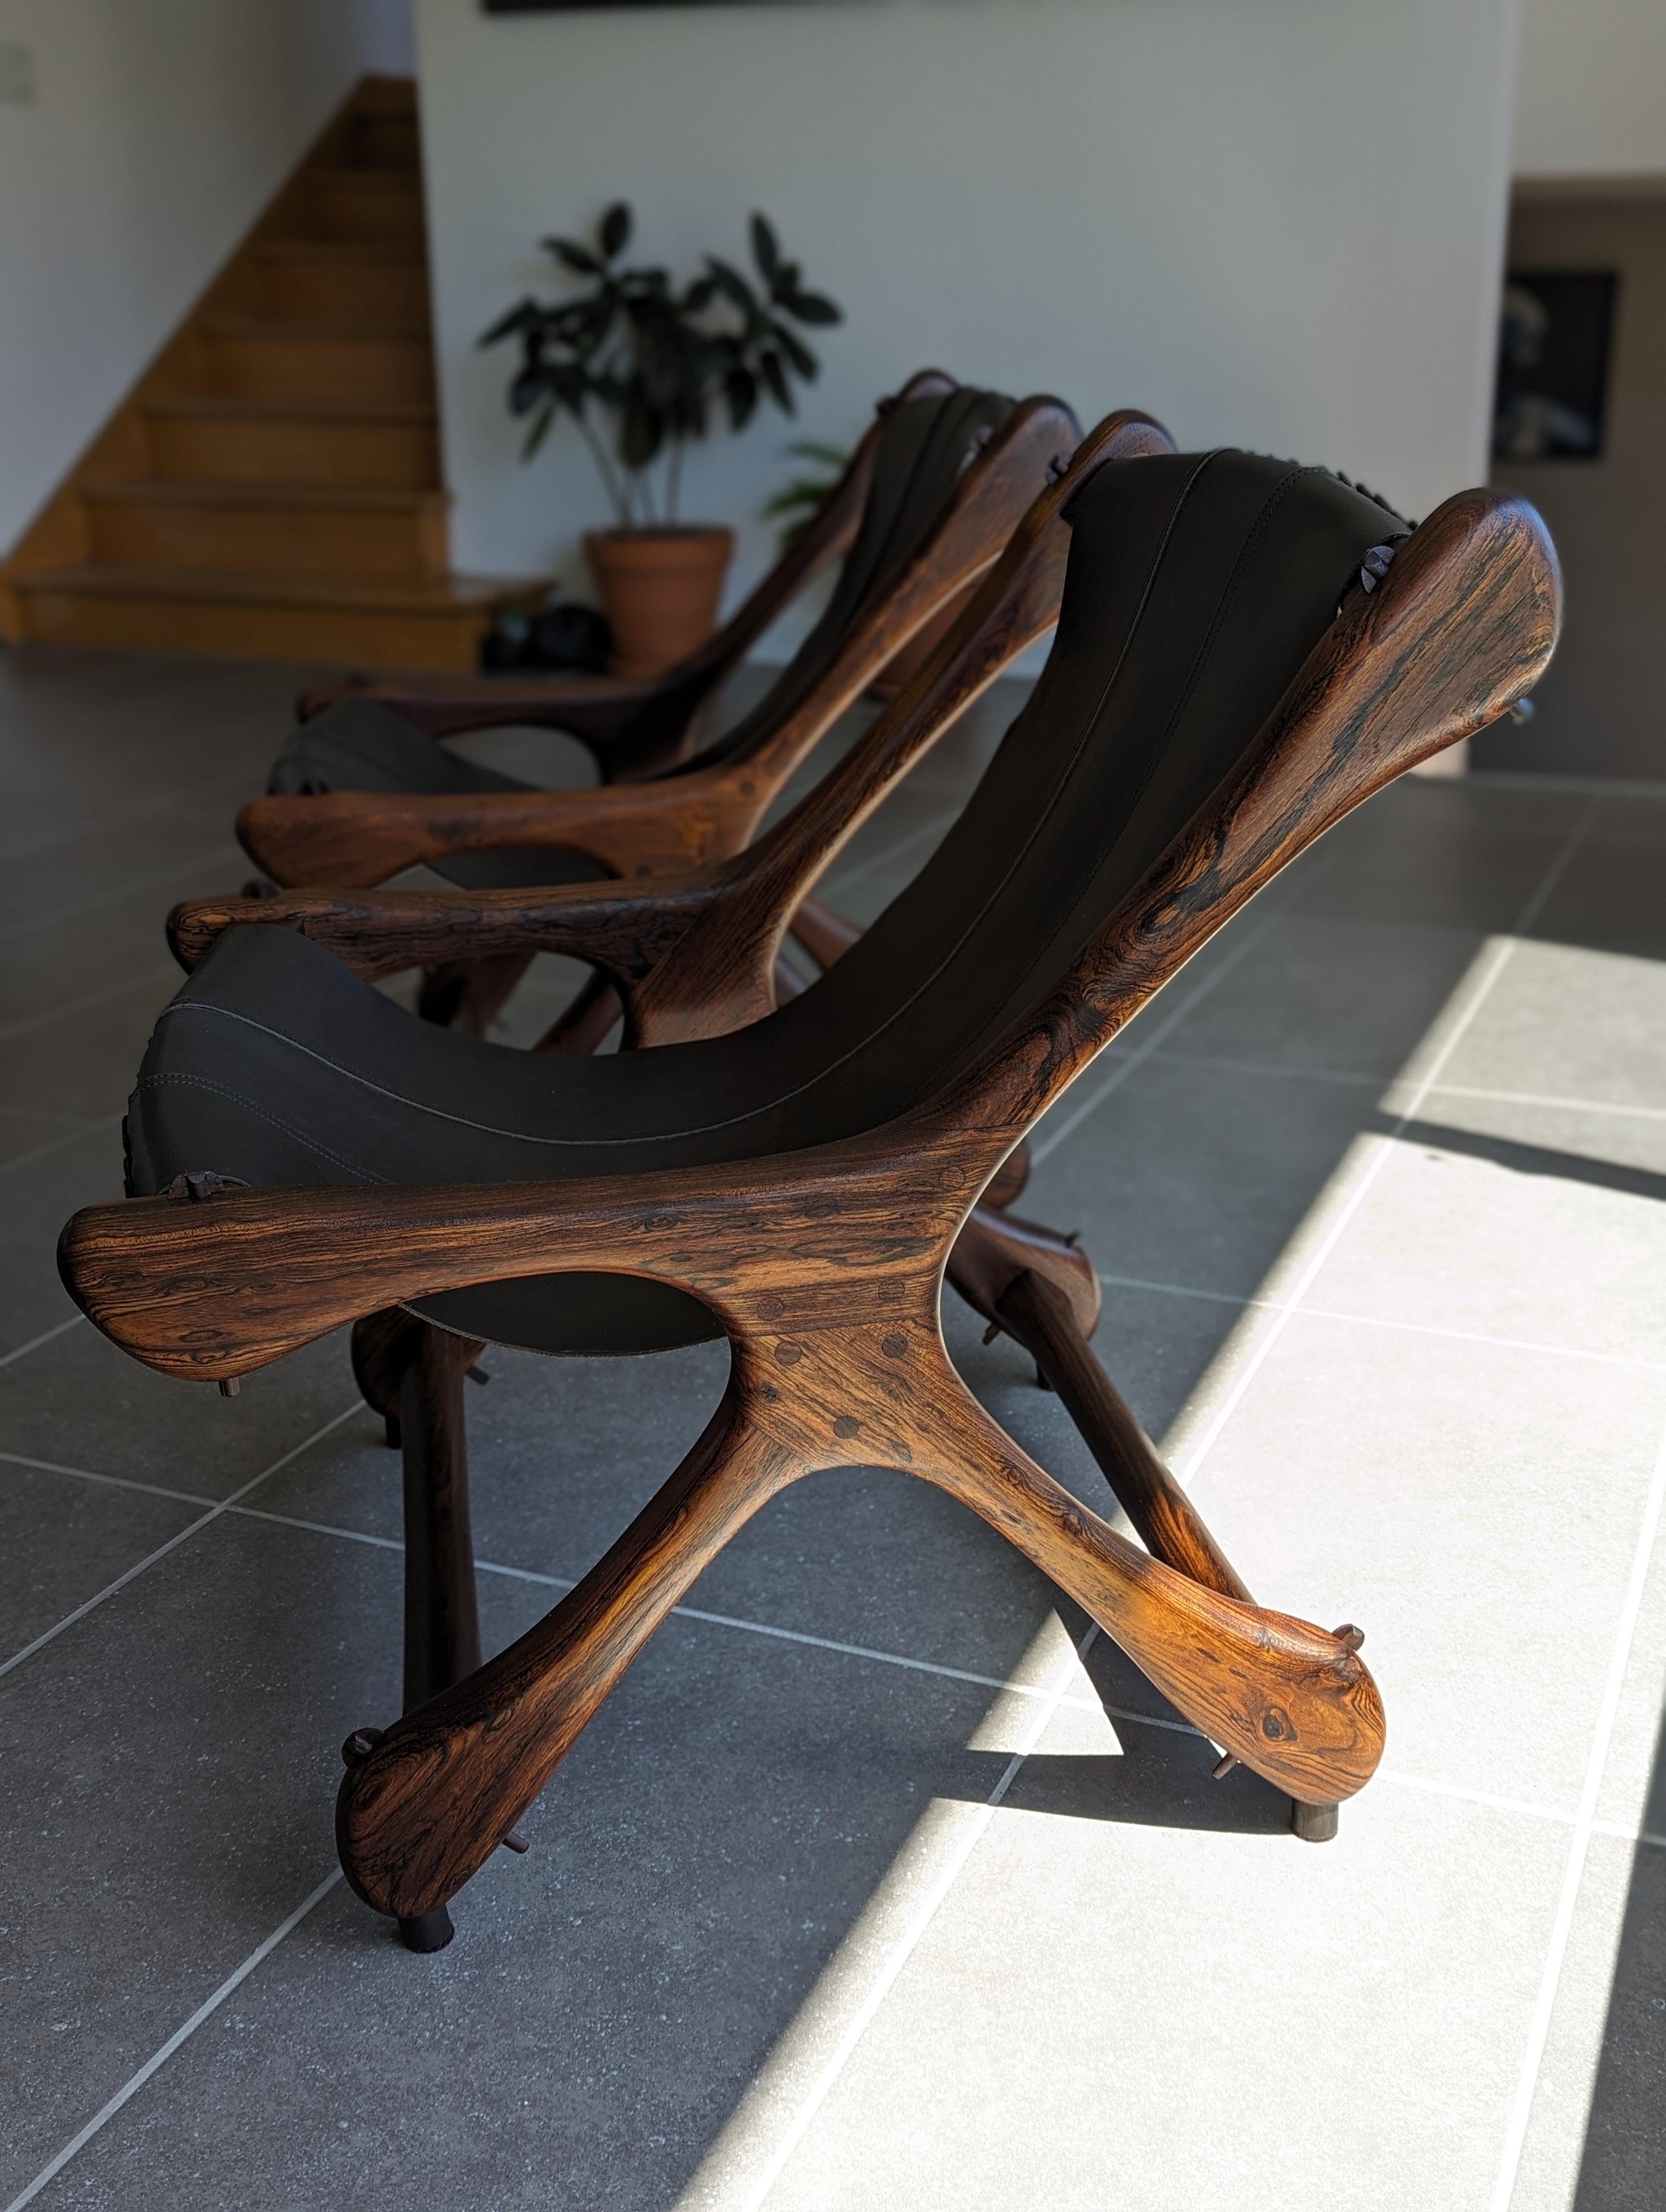 Don Shoemaker Sloucher Rosewood & Leather Sling Chairs for Señal, S.A., 1960s For Sale 1